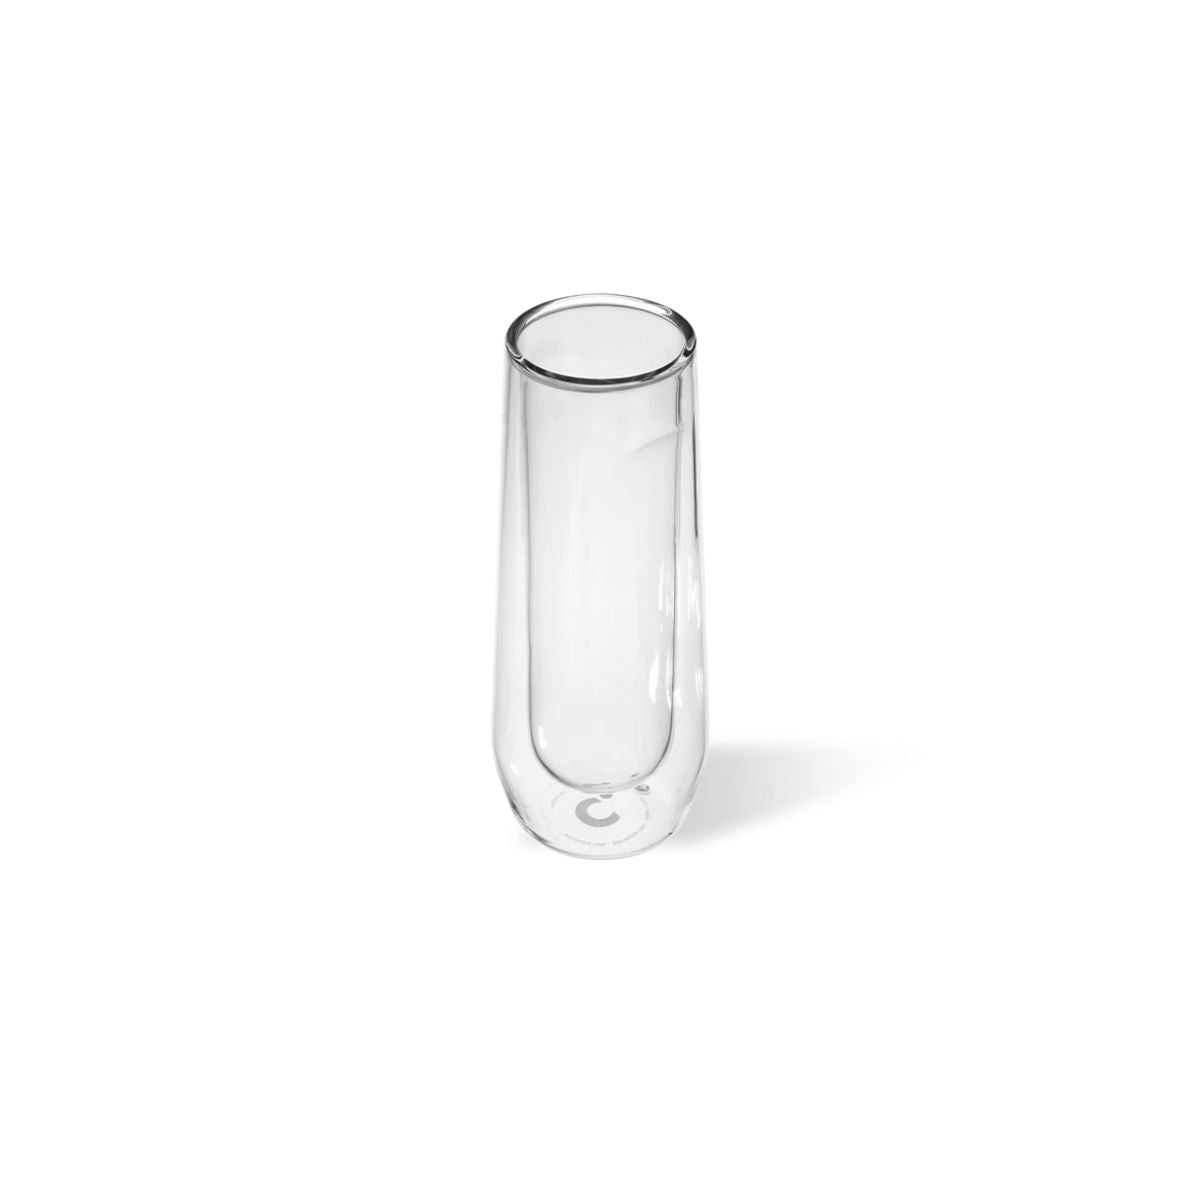 CORKCICLE Double Walled Cup Flute Glass (Pk Of 2) - Clear